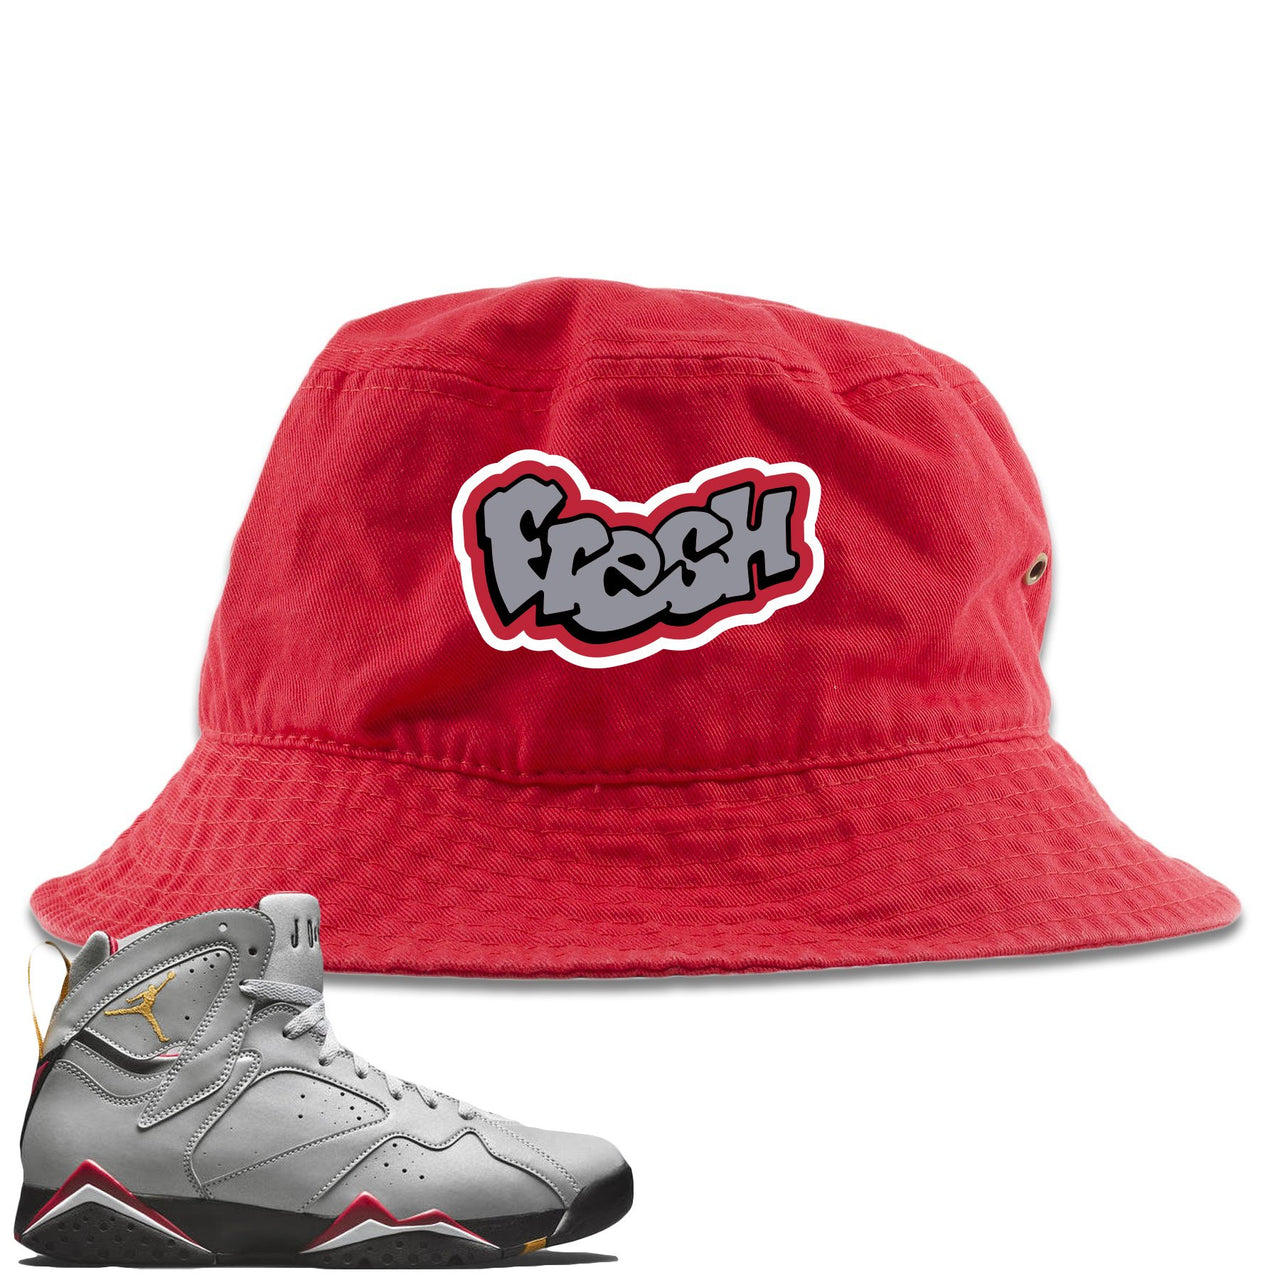 Reflections of a Champion 7s Bucket Hat | Fresh Logo, Red